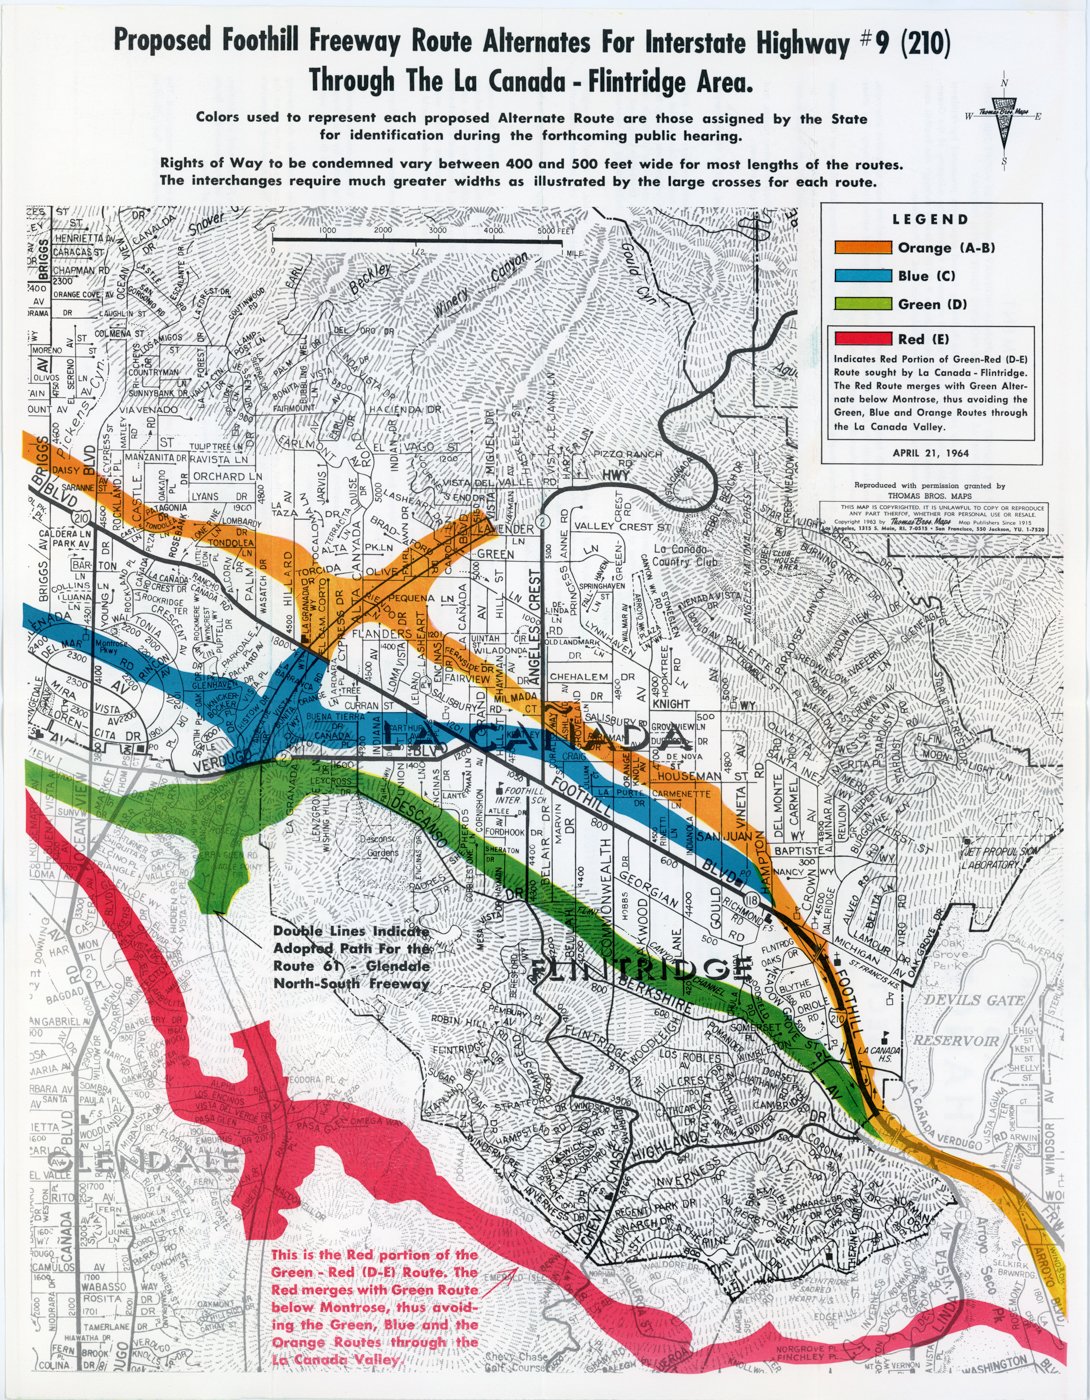  Map with flyer by the La Cañada Valley Freeway Action Committee, May 1964 